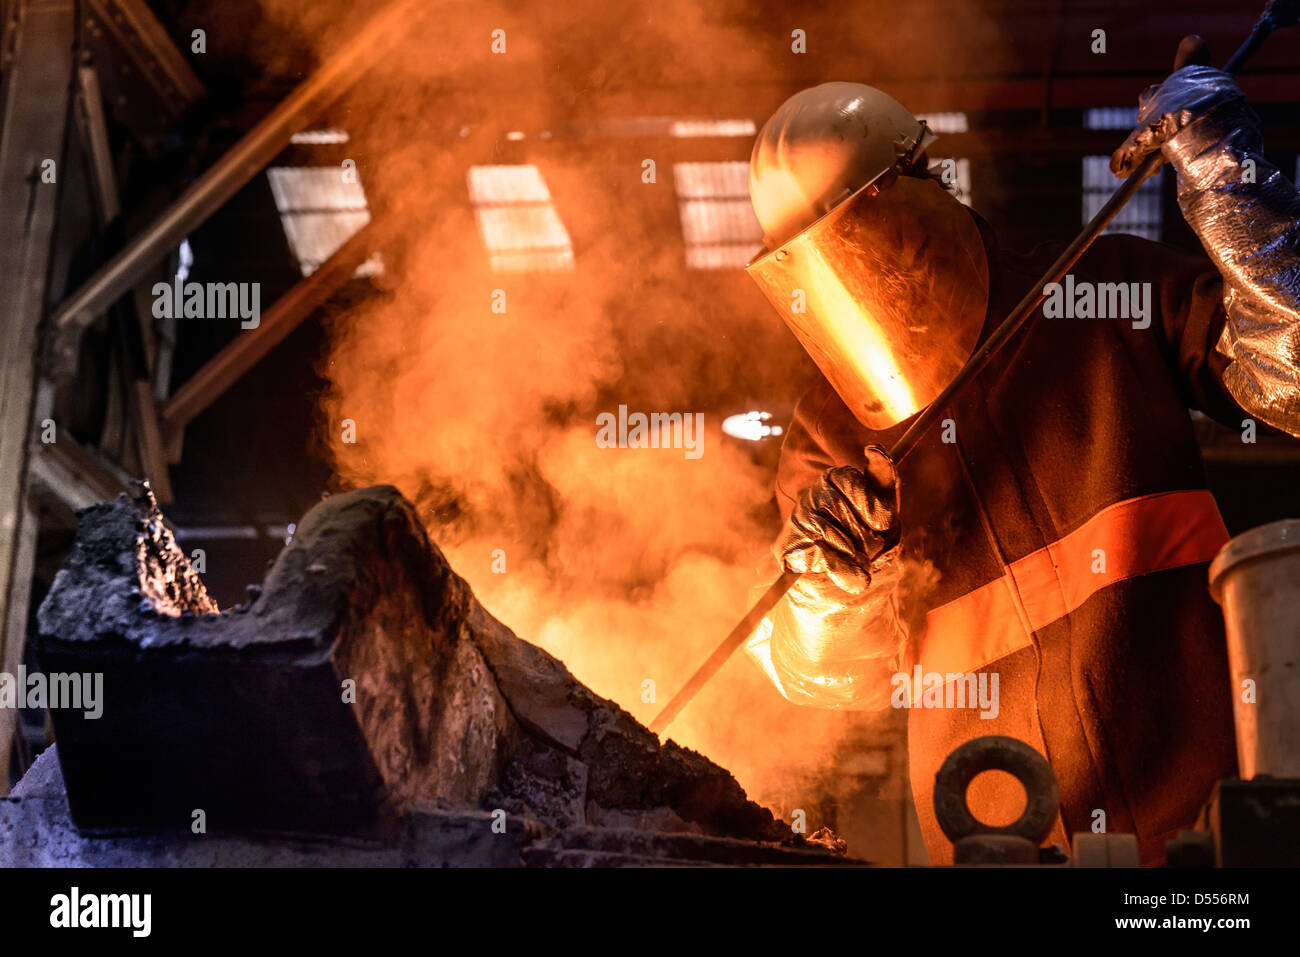 Worker stirring molten metal in foundry Stock Photo